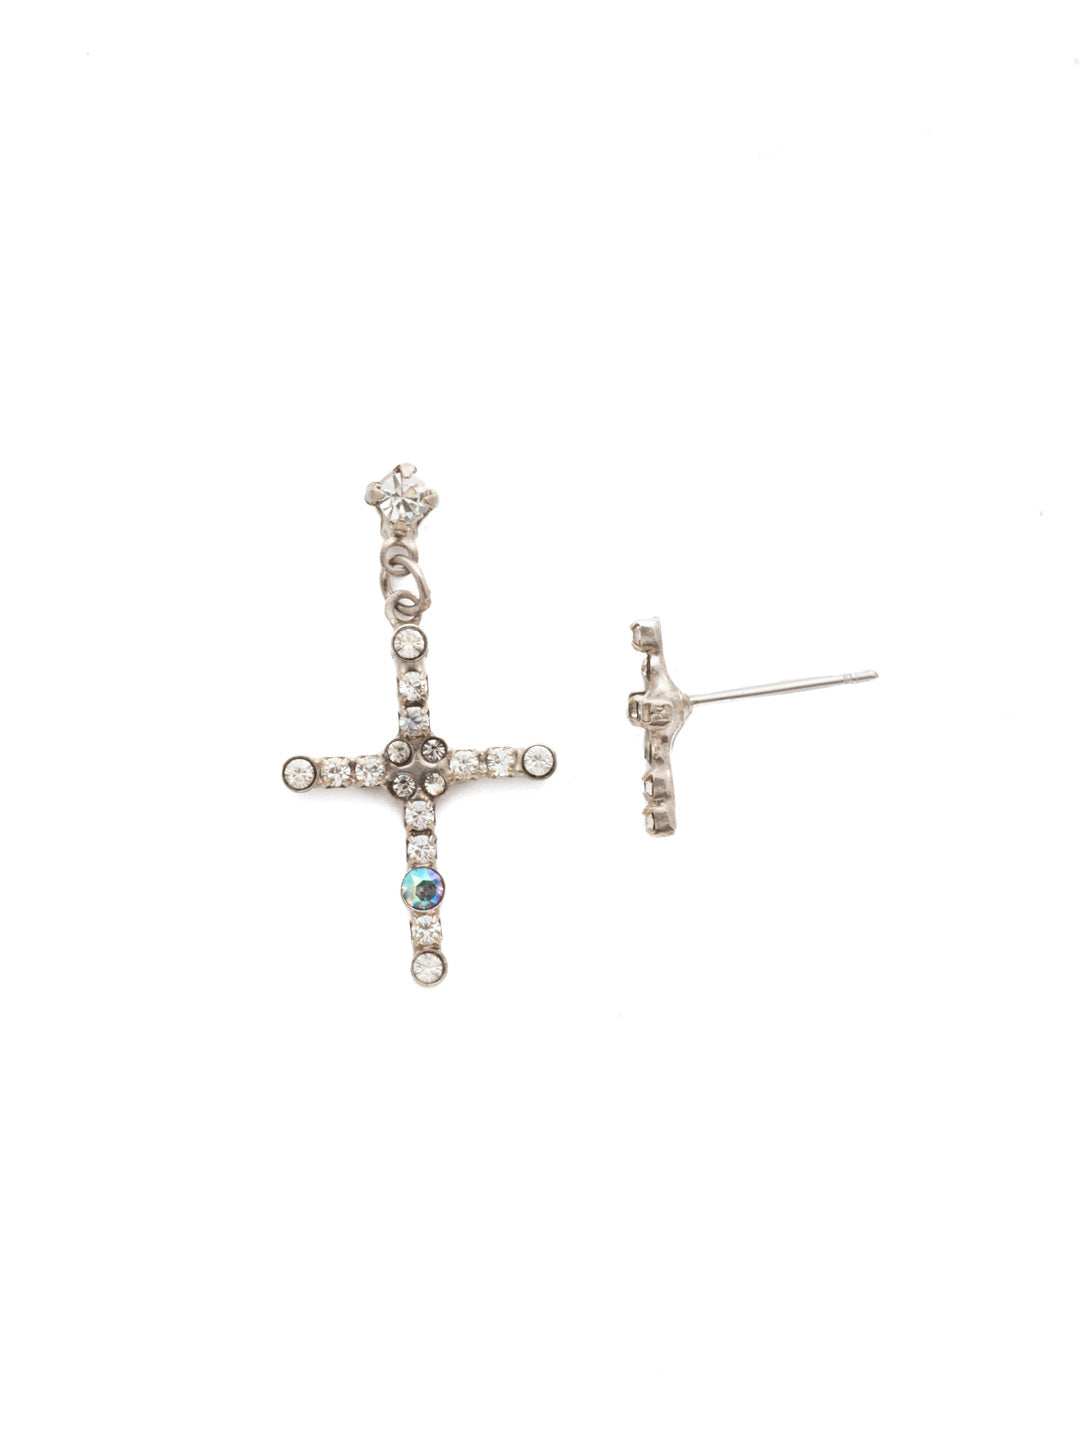 Alexis Stud Earrings - EEN2ASSTC - <p>The Alexis Stud Earrings are versatility in a cross style. Show you can rock the trend in a different way with these two unique crystal covered crosses: one is a simple, small stud; the other is a dangler in a larger size. From Sorrelli's Storm Clouds collection in our Antique Silver-tone finish.</p>